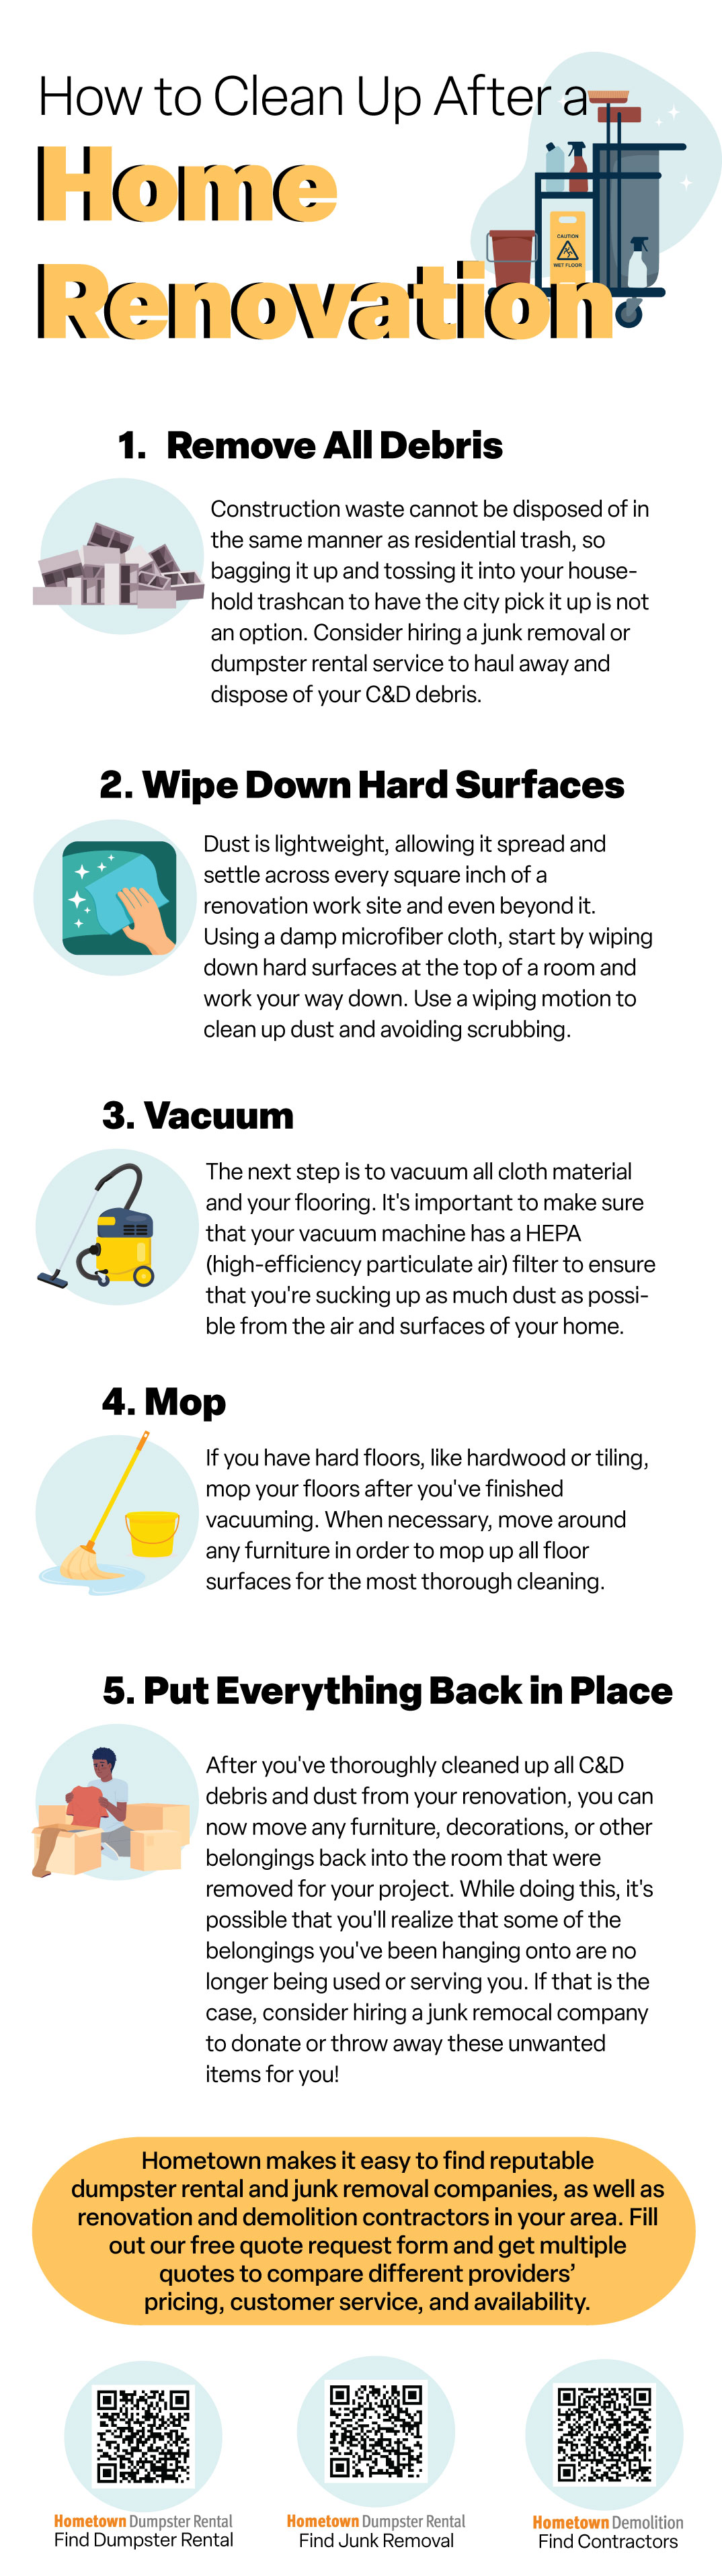 How to Clean Up After a Home Renovation Infographic